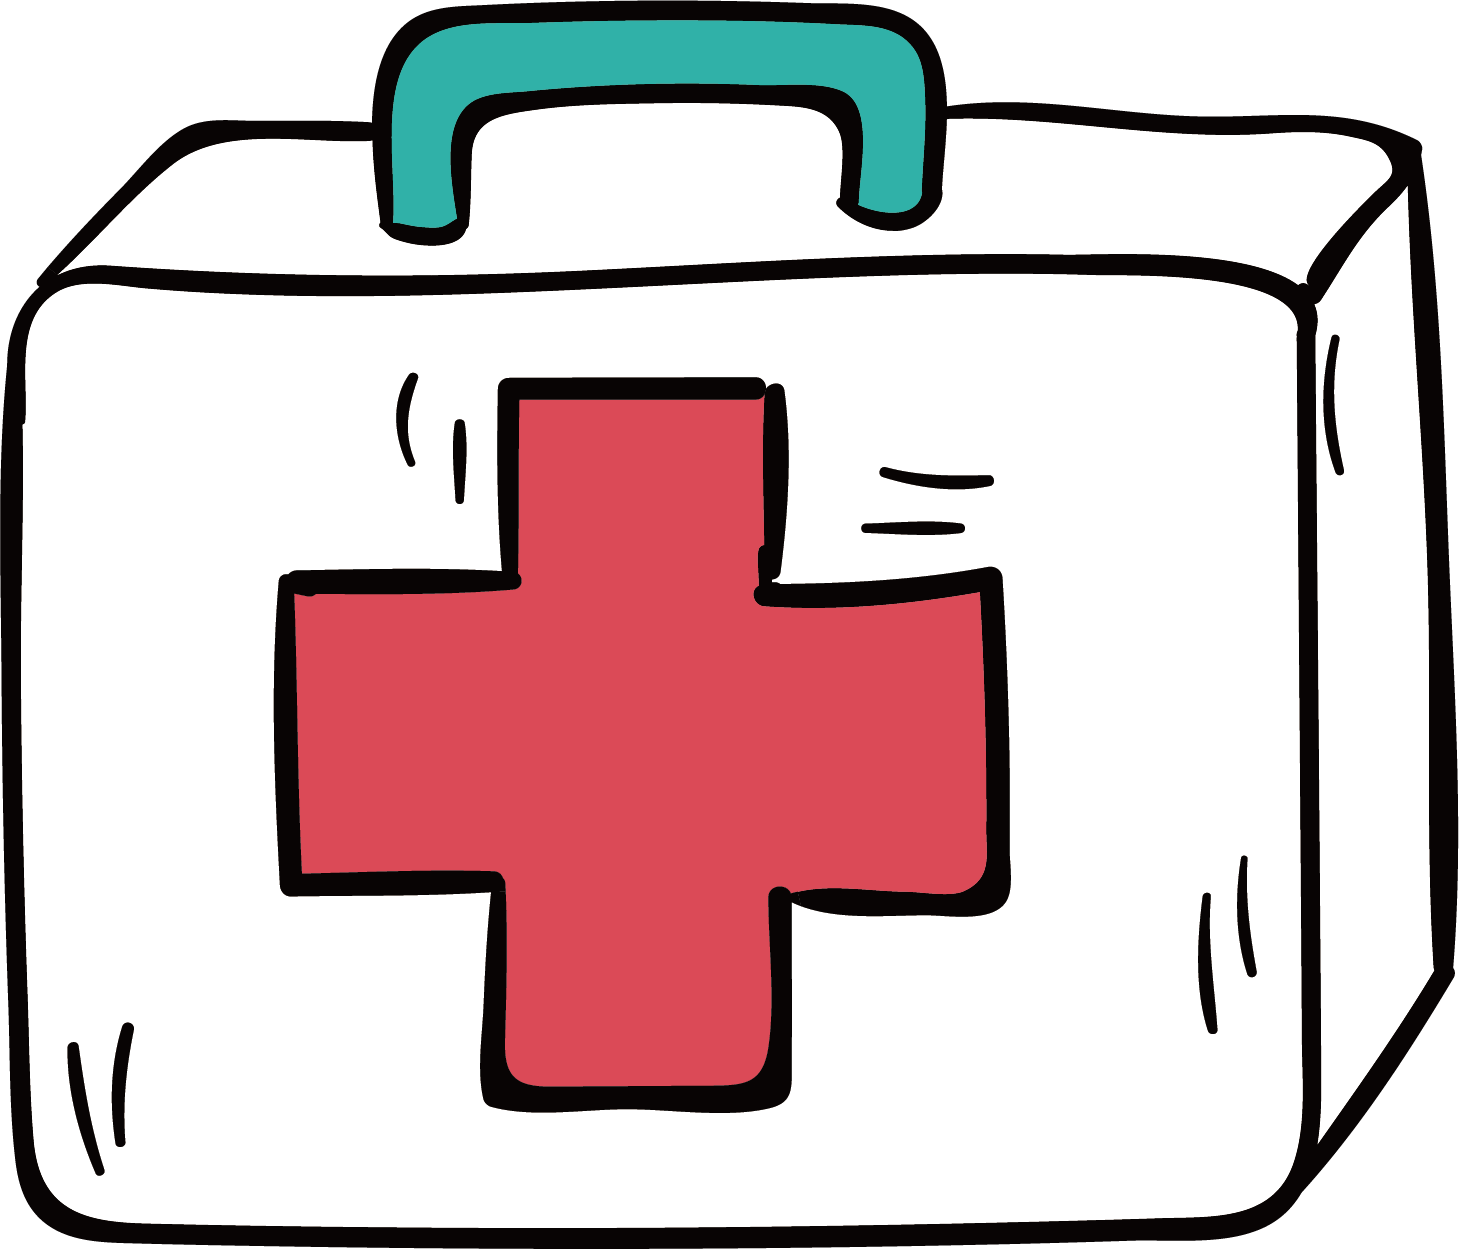 First Aid Kit Png Transparent Image Download Size 1459x1249px